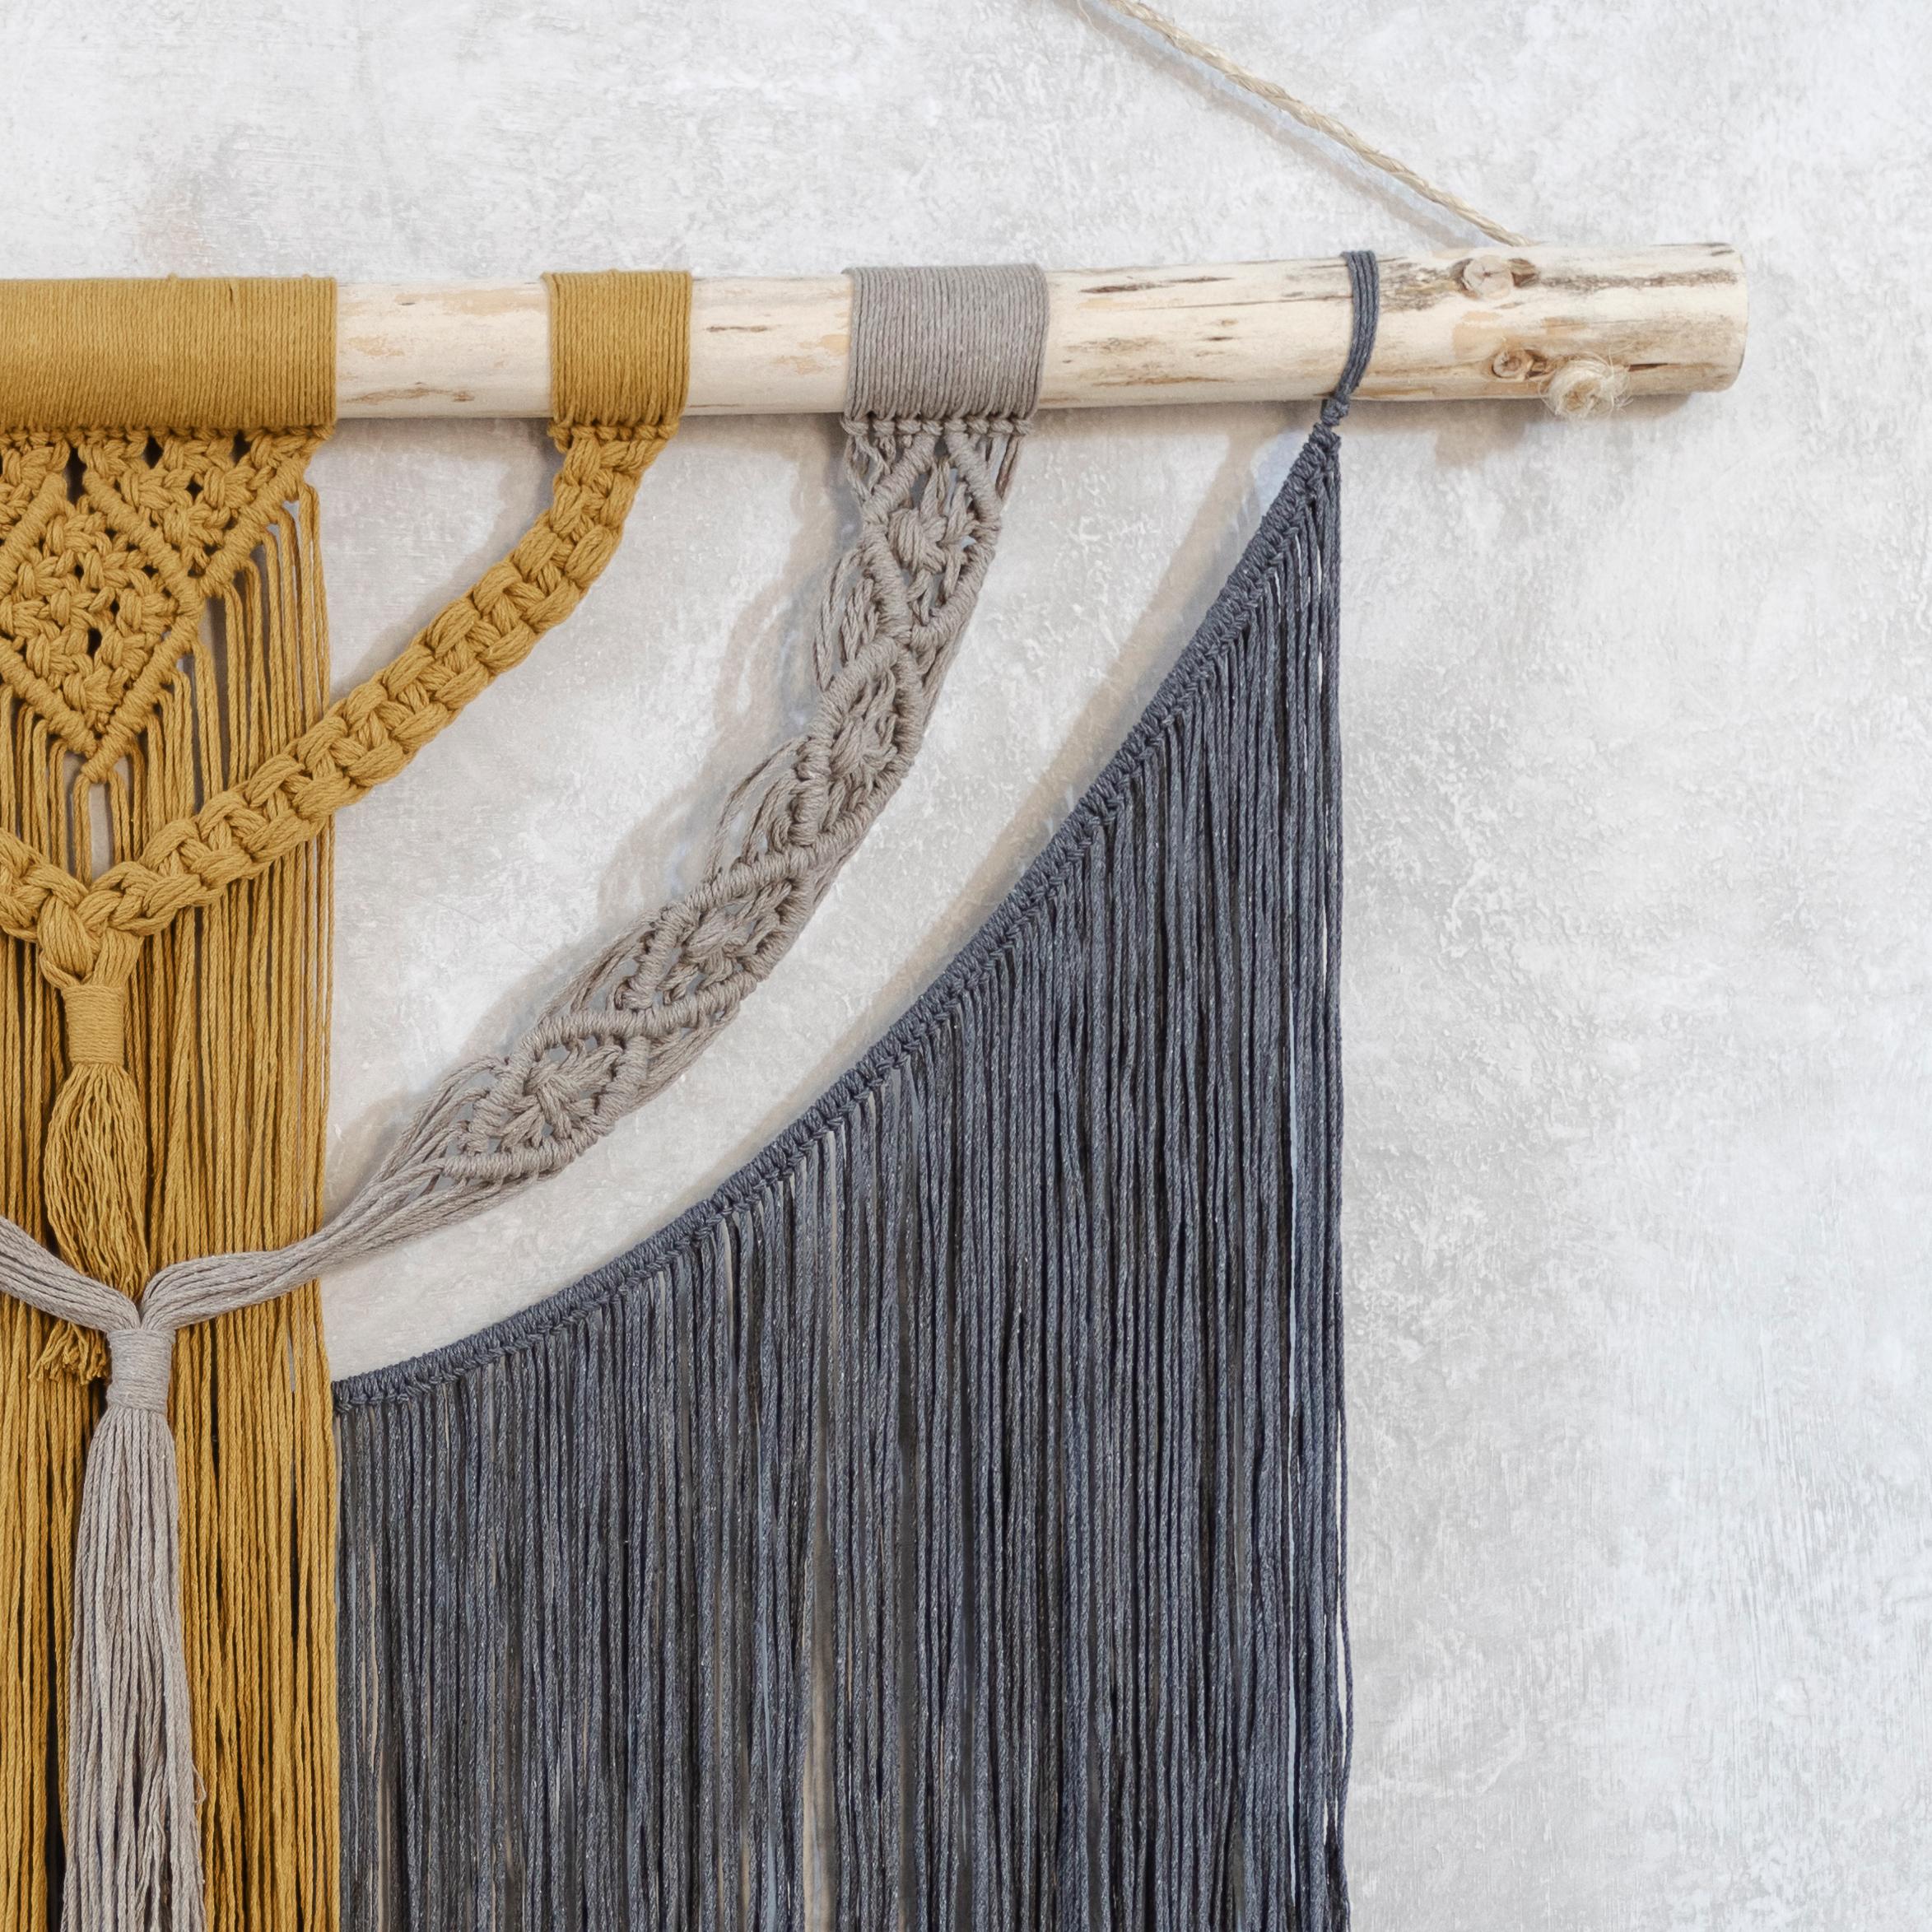 Hand-weaved macramé, of naturally dyed cotton, by humans of Máak-an in Oaxaca.

This large contemporary colorful macrame wall hanging will add statement, boldness, and warmth to any room. Perfect for a touch of natural decor to the modern home, or